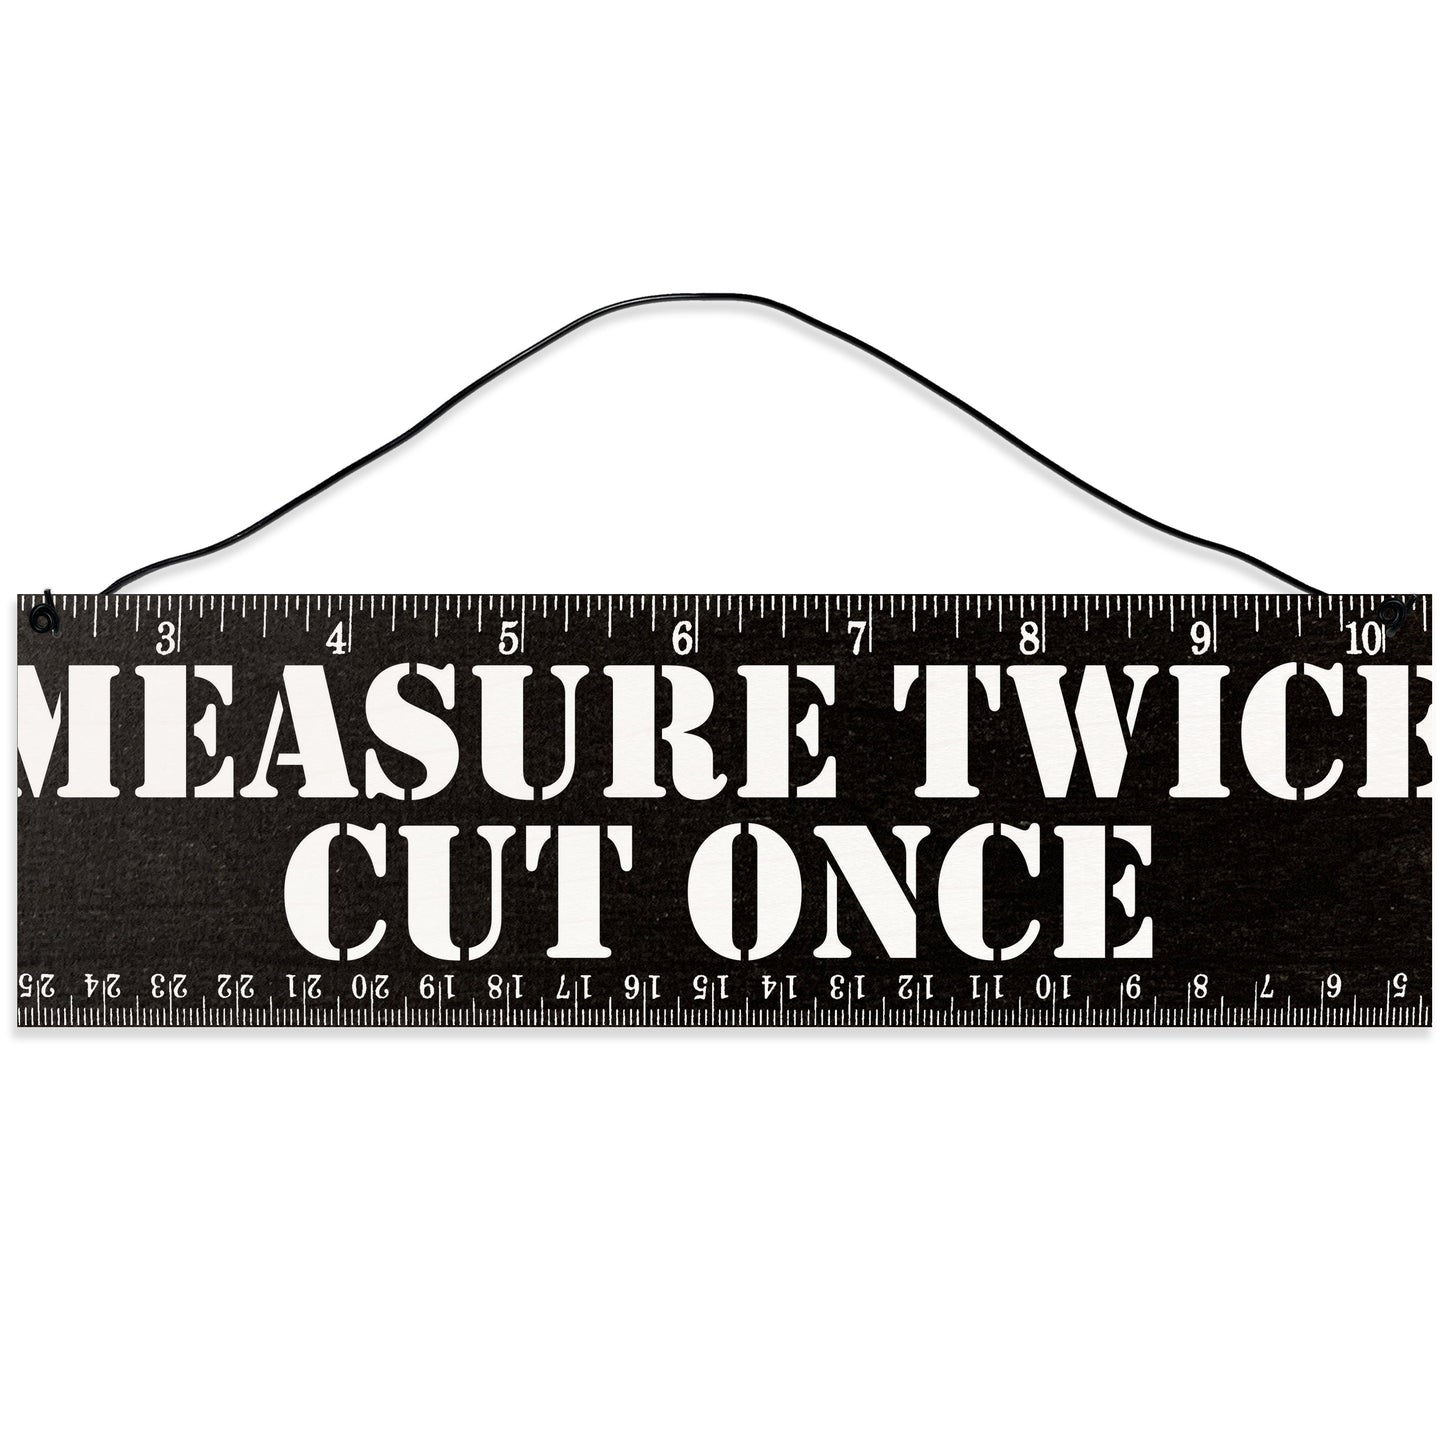 Sawyer's Mill - Measure Twice. Cut Once. Wood Sign for Home or Office. Measures 3x10 inches.